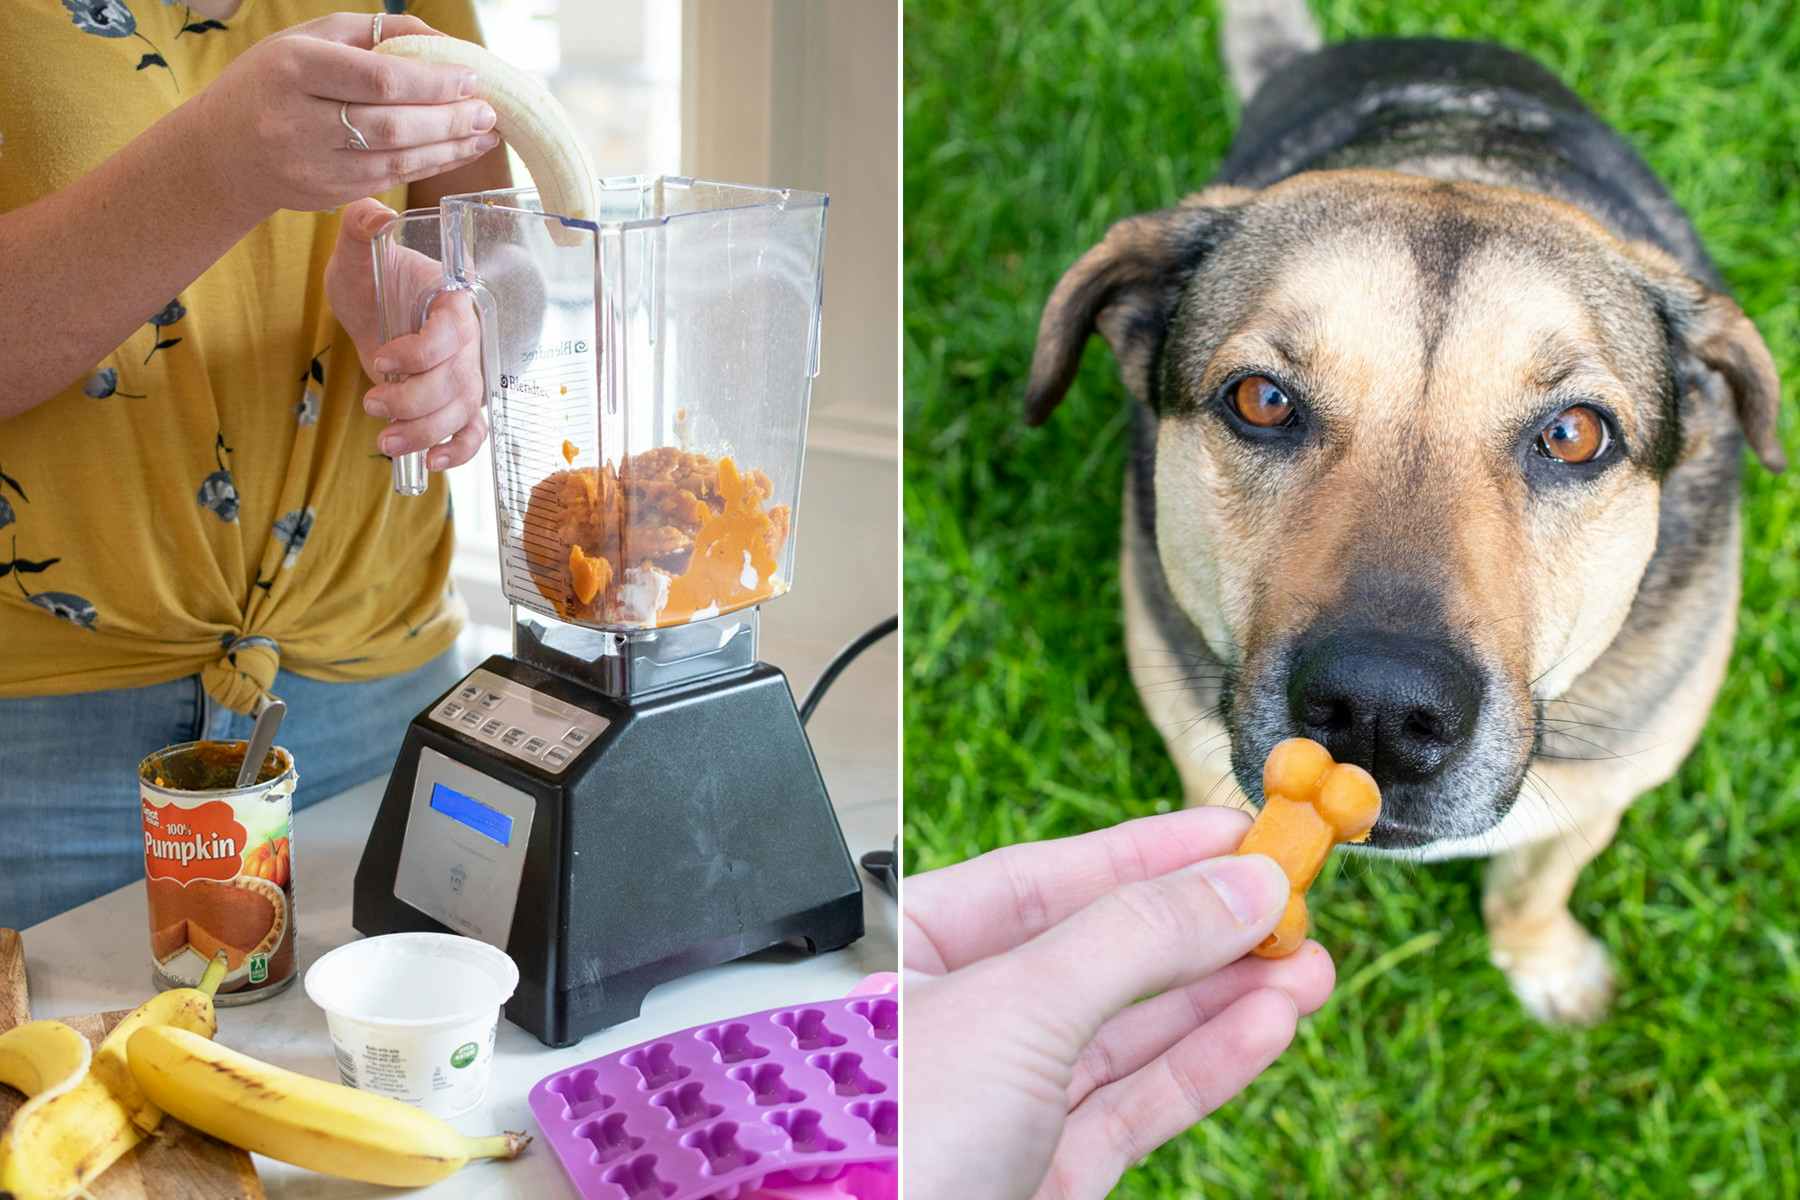 A homemade dog treat being fed to a dog